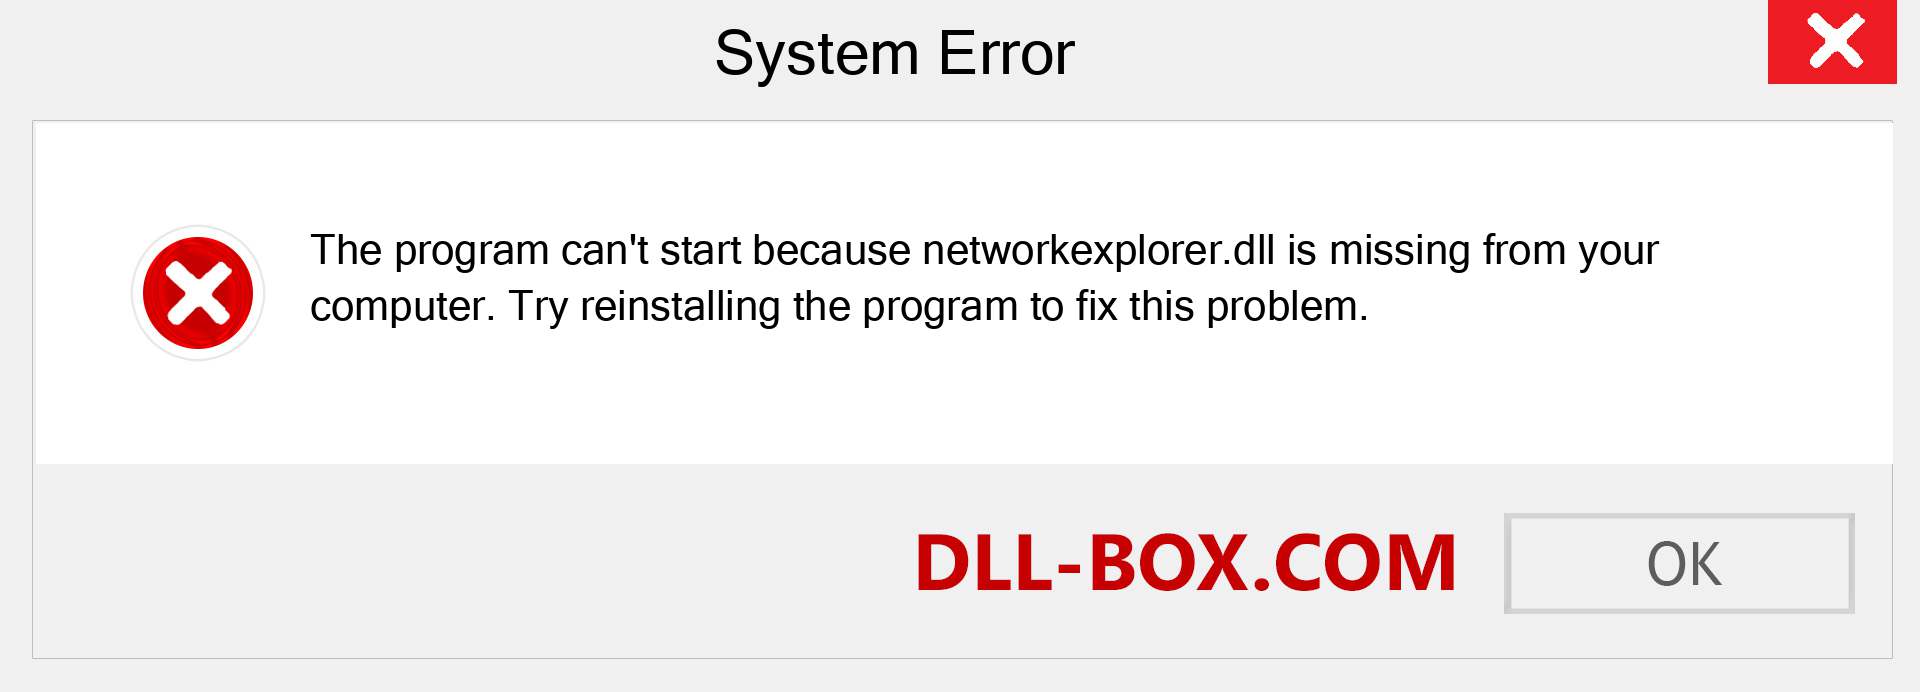  networkexplorer.dll file is missing?. Download for Windows 7, 8, 10 - Fix  networkexplorer dll Missing Error on Windows, photos, images